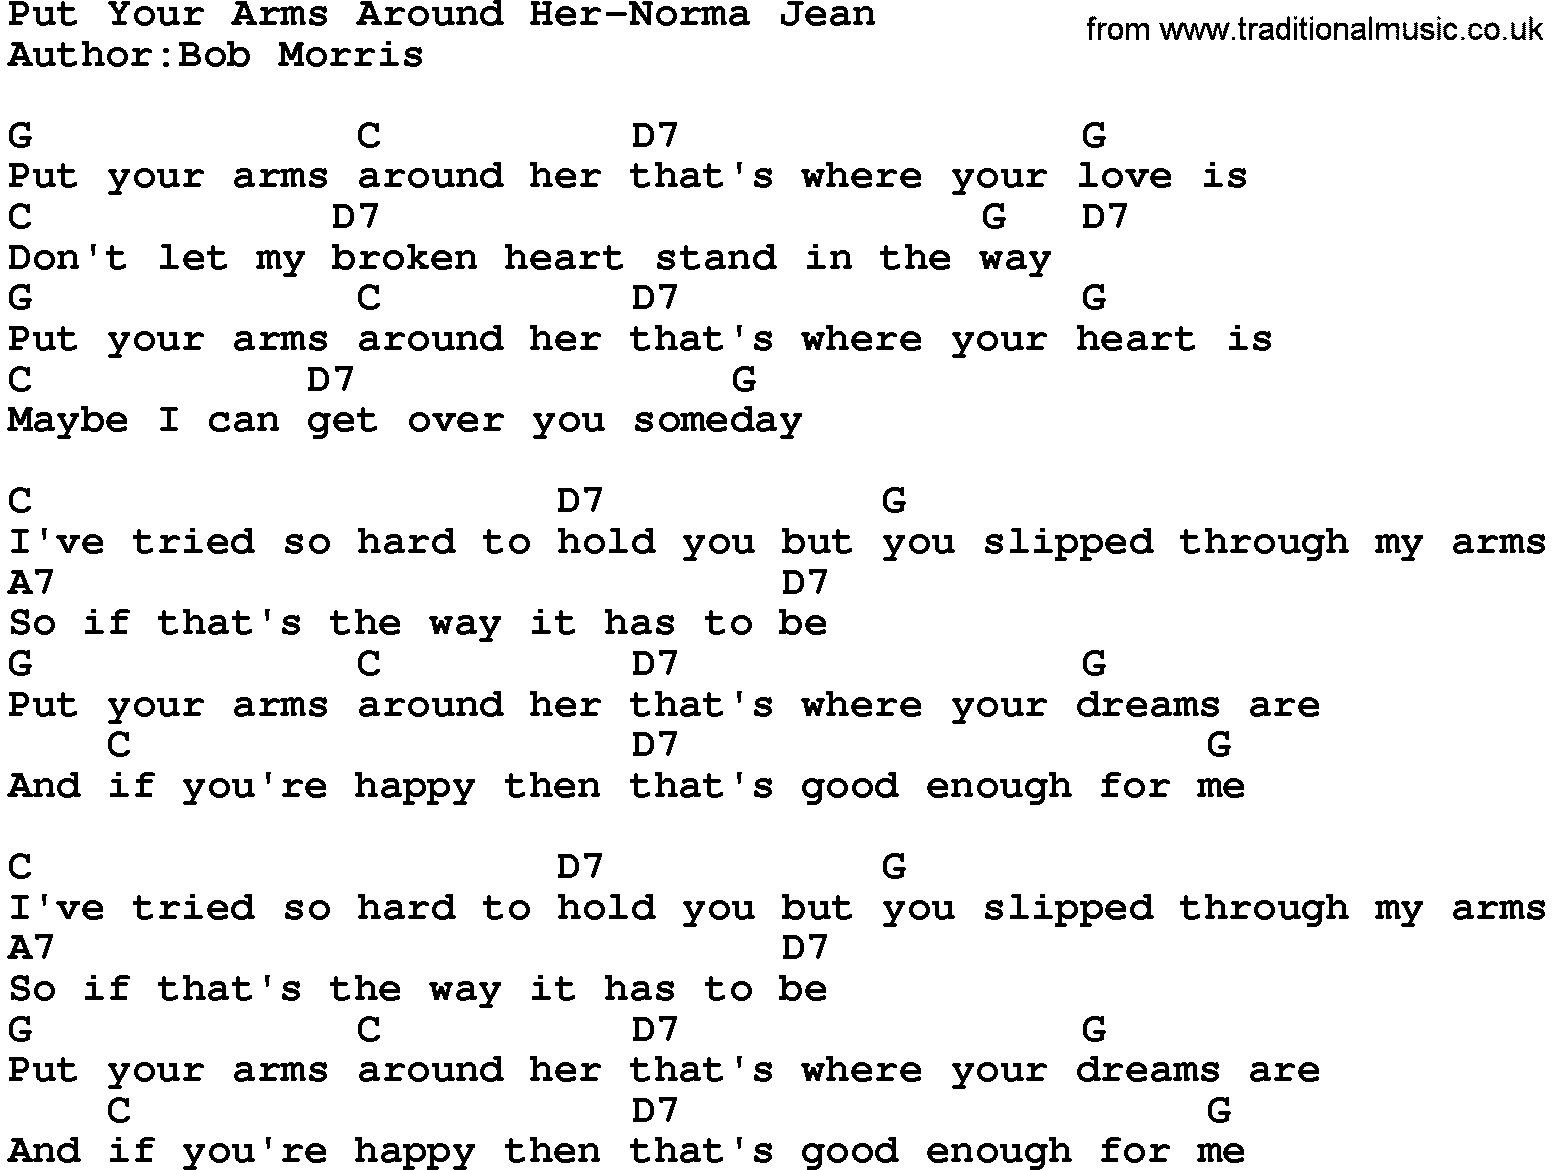 Country music song: Put Your Arms Around Her-Norma Jean lyrics and chords